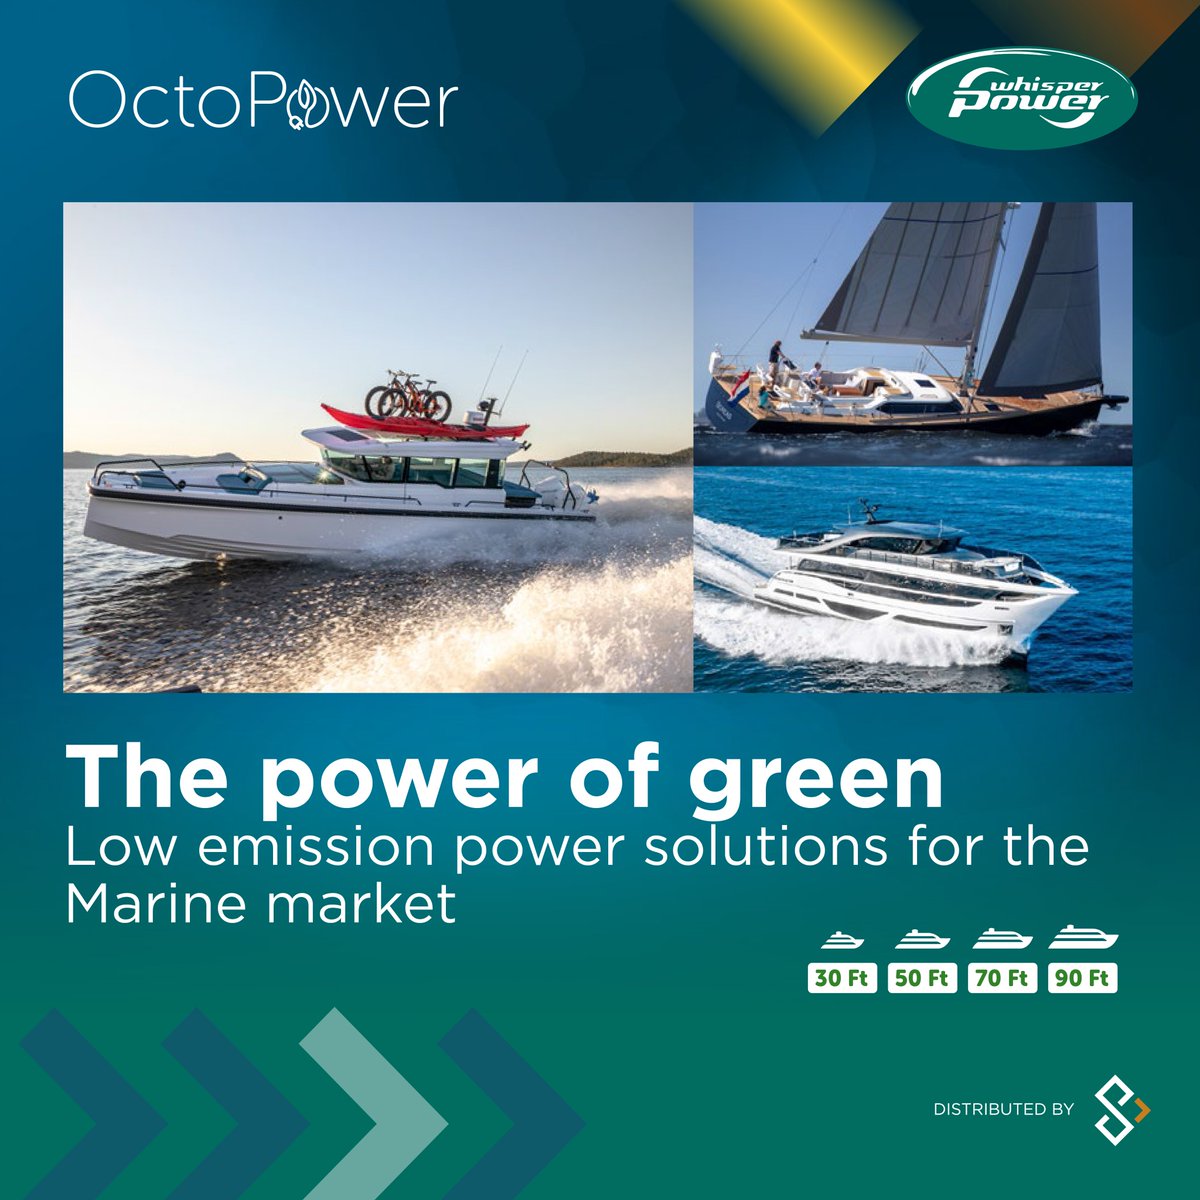 #loadshedding WILL be back, you know. Also read this if you own a boat. @WhisperPower’s OctoPower is a quiet, powerful alternative power solution for marine, domestic or commercial applications. southernpower.co.za/whisper-power-…

#boating #loadshedding #offgrid #alternativepower